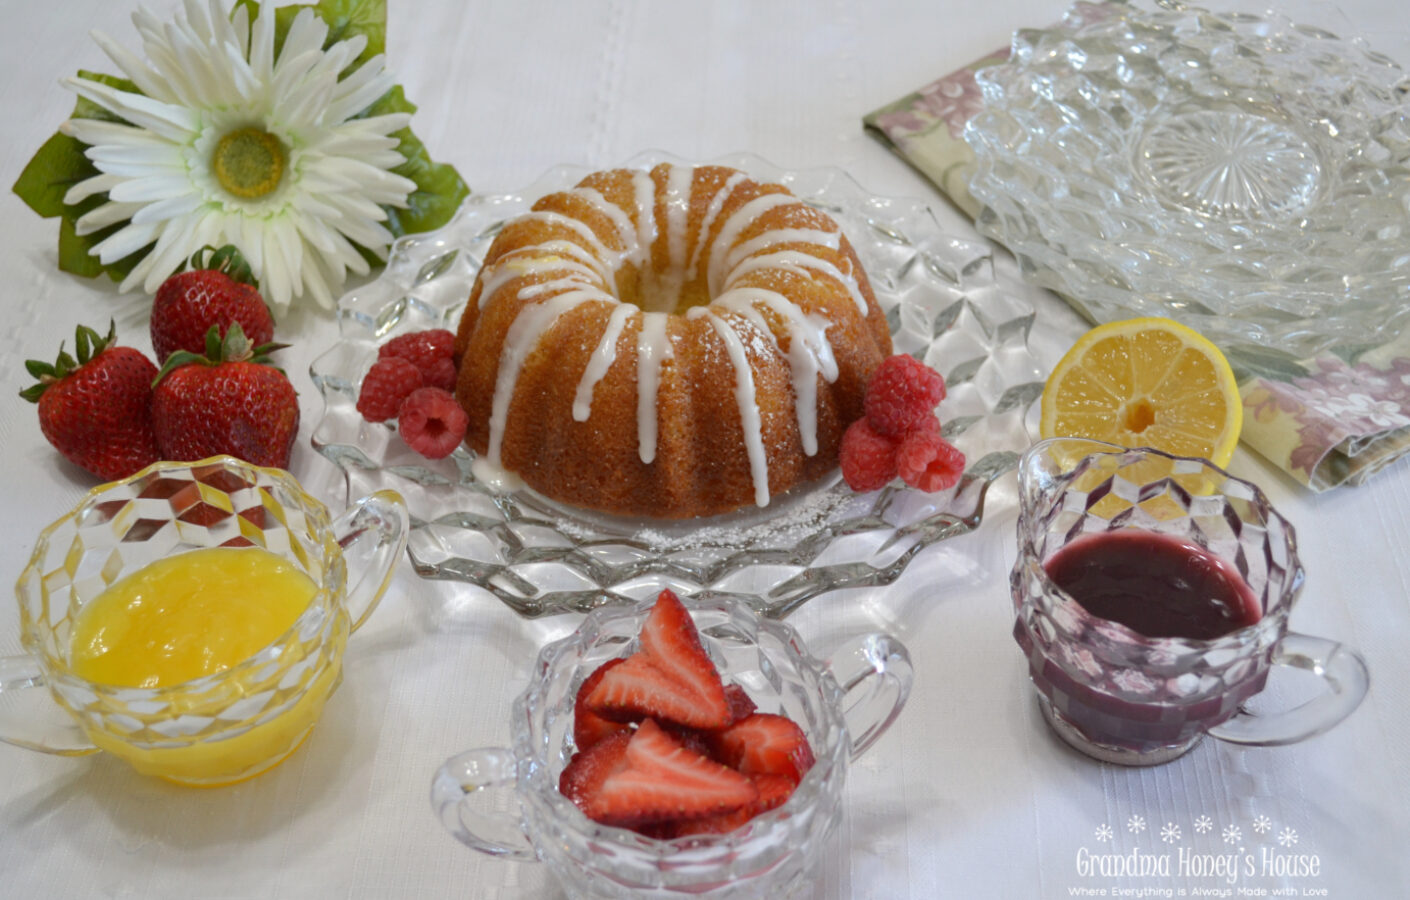 Small Bundt Cake Recipe (6 Inch) - Homemade In The Kitchen